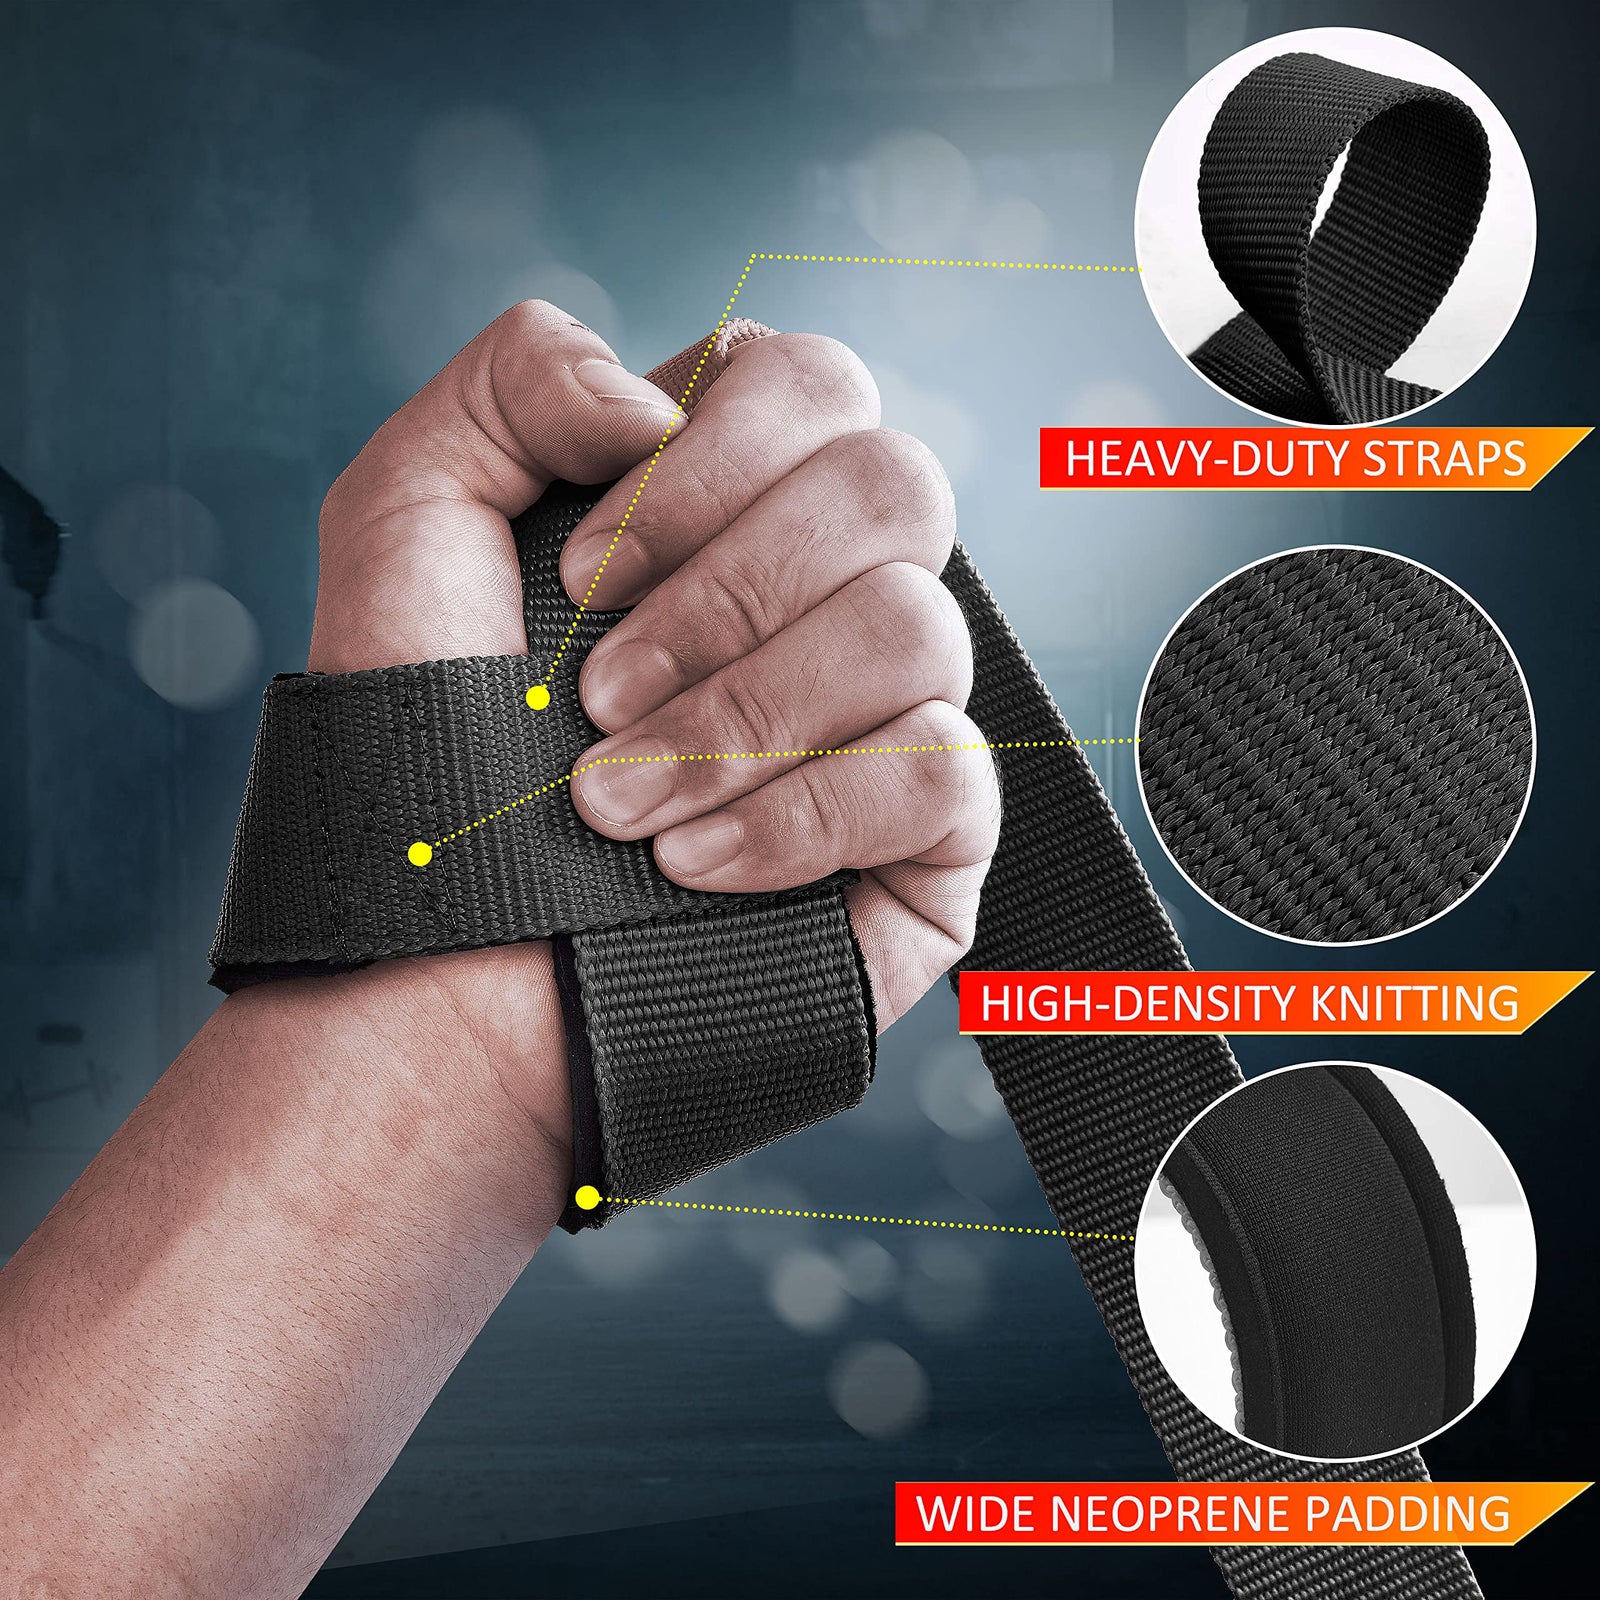 Wrist Wraps Weight lifting Gym Straps Support Strength Hand